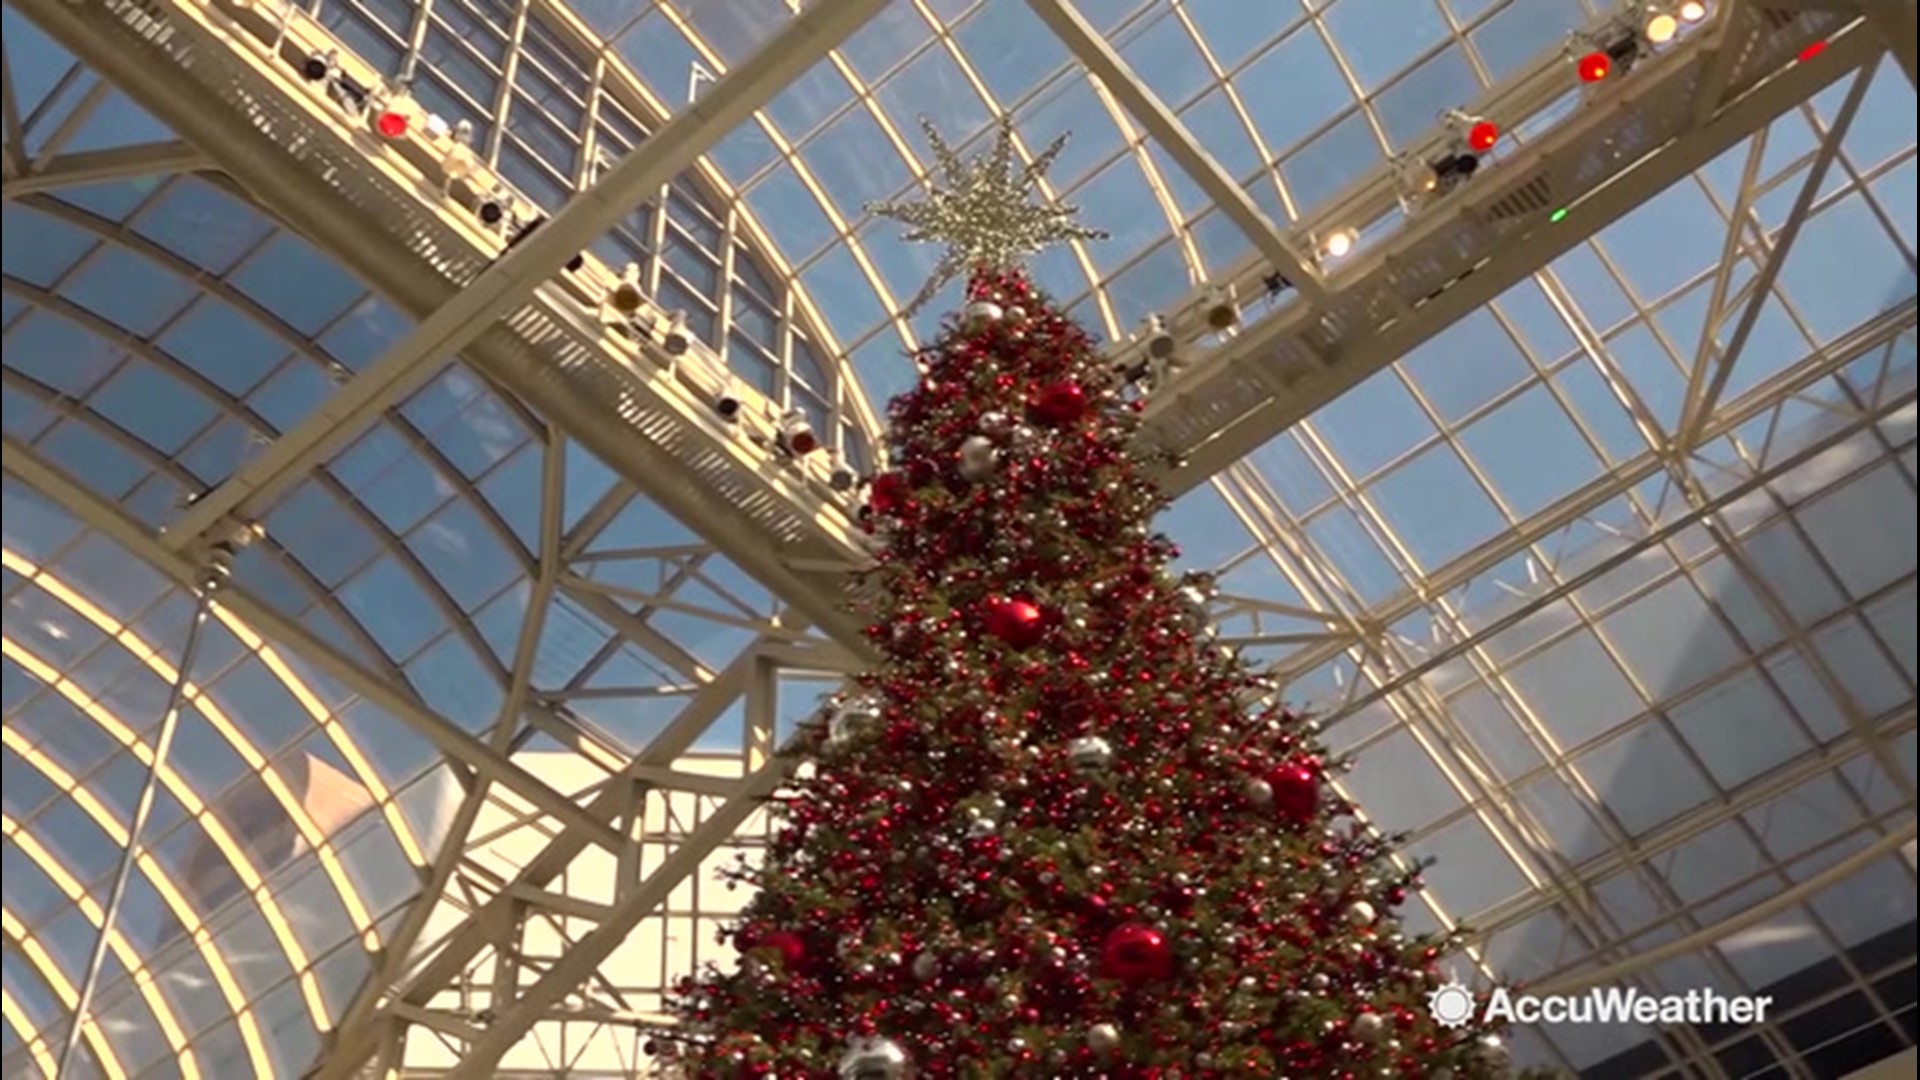 Think the Rockefeller Christmas tree in New York is big? Take a look at this tree in Galleria Dallas. AccuWeather's Bill Wadell visited the tree on Dec. 3.